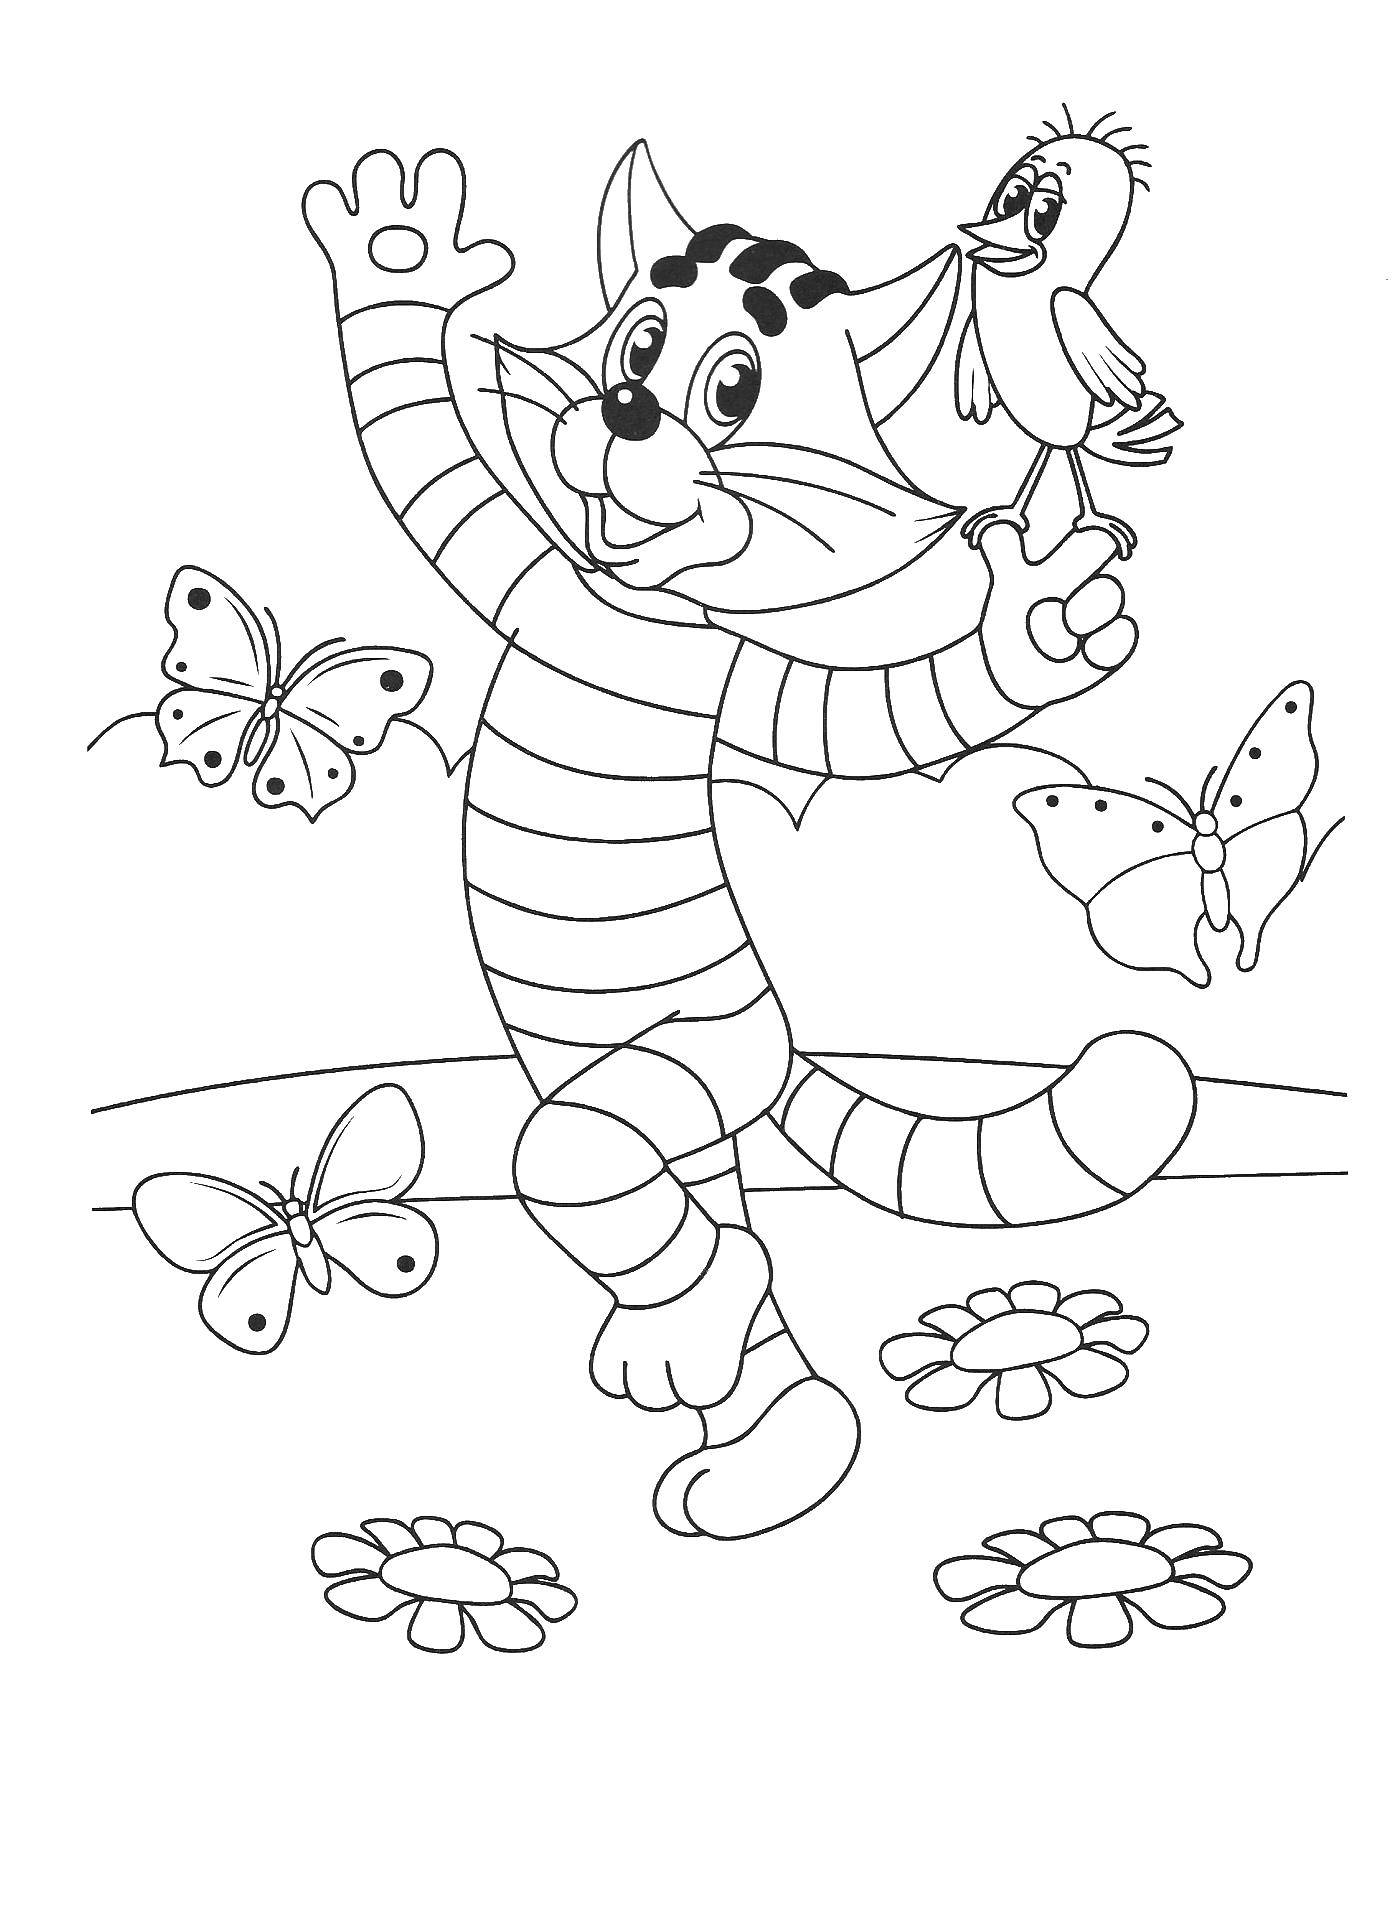 Coloring Sylvester with Galchenko. Category coloring, buttermilk. Tags:  galchenok, Matroskin.